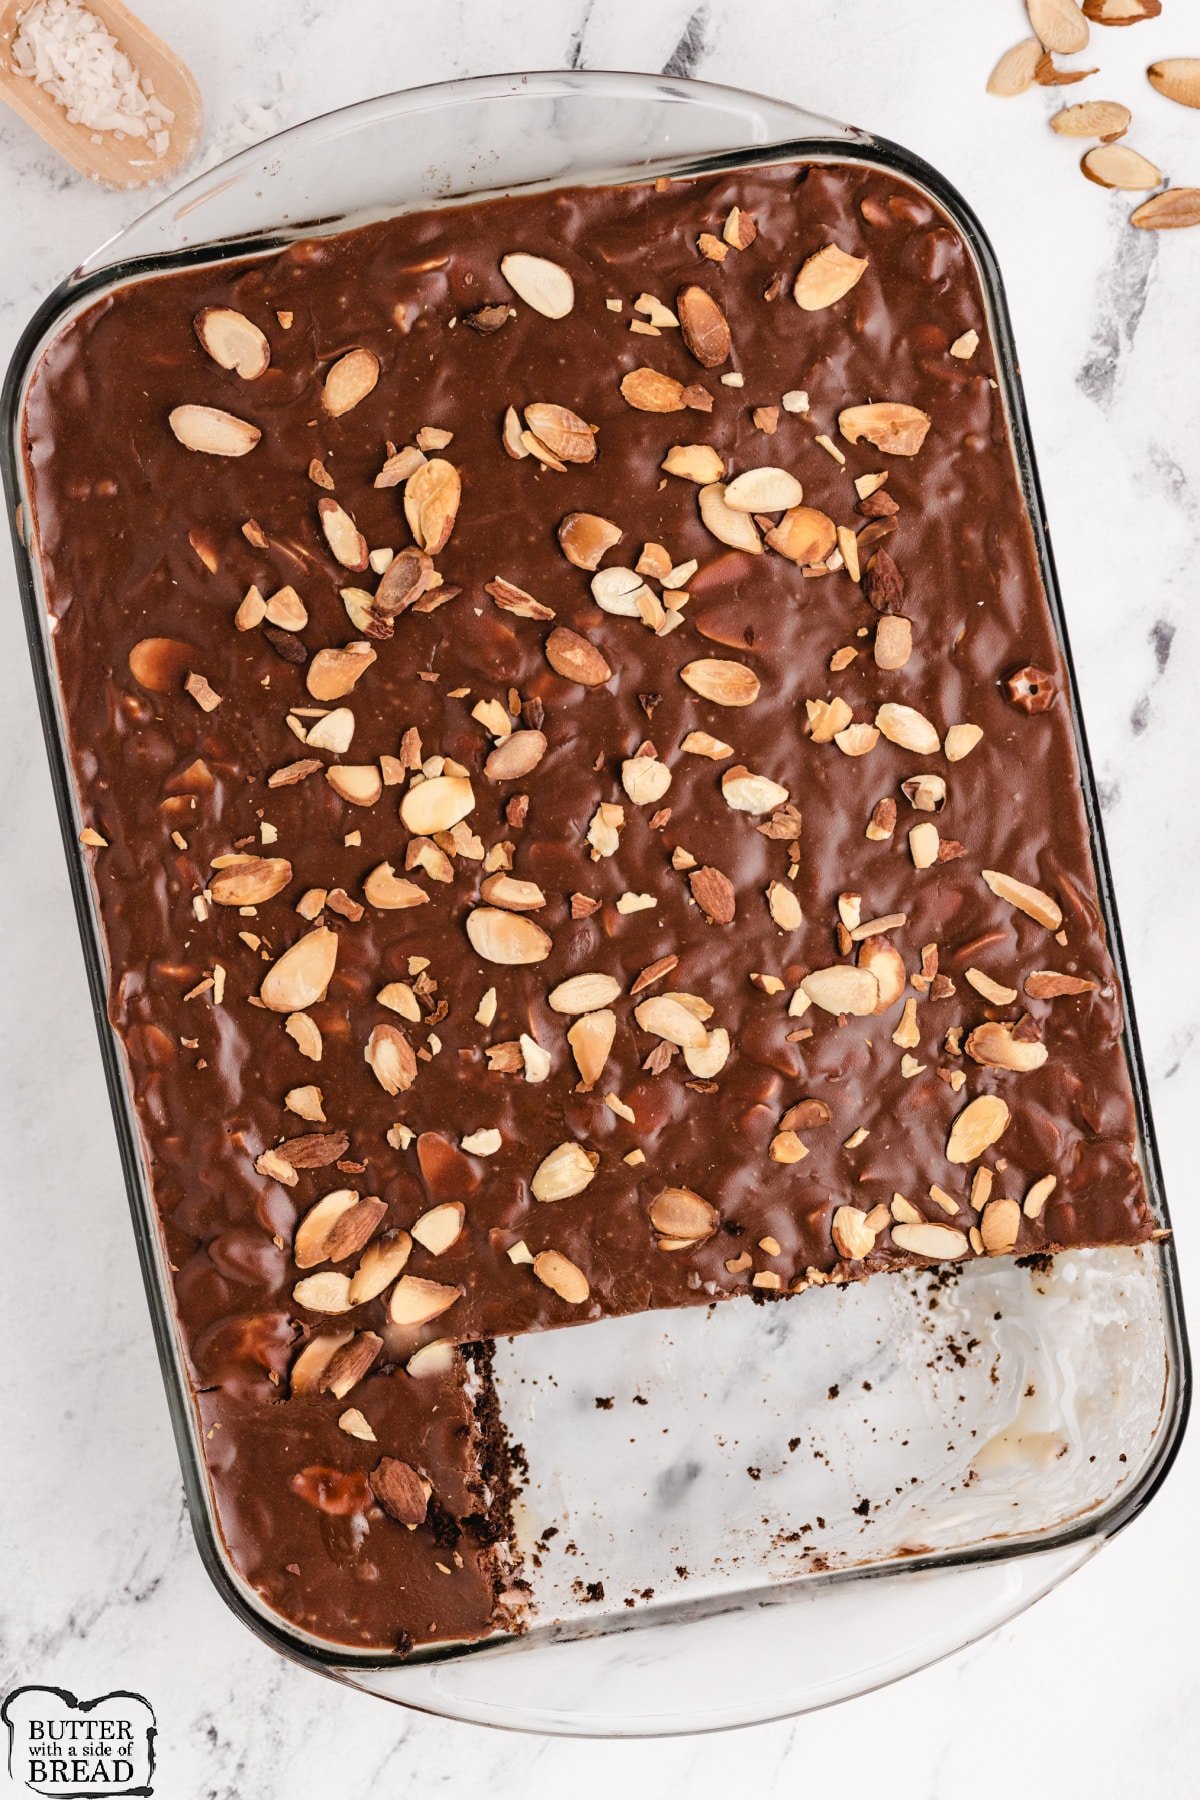 Chocolate Cake with almonds, coconut and chocolate